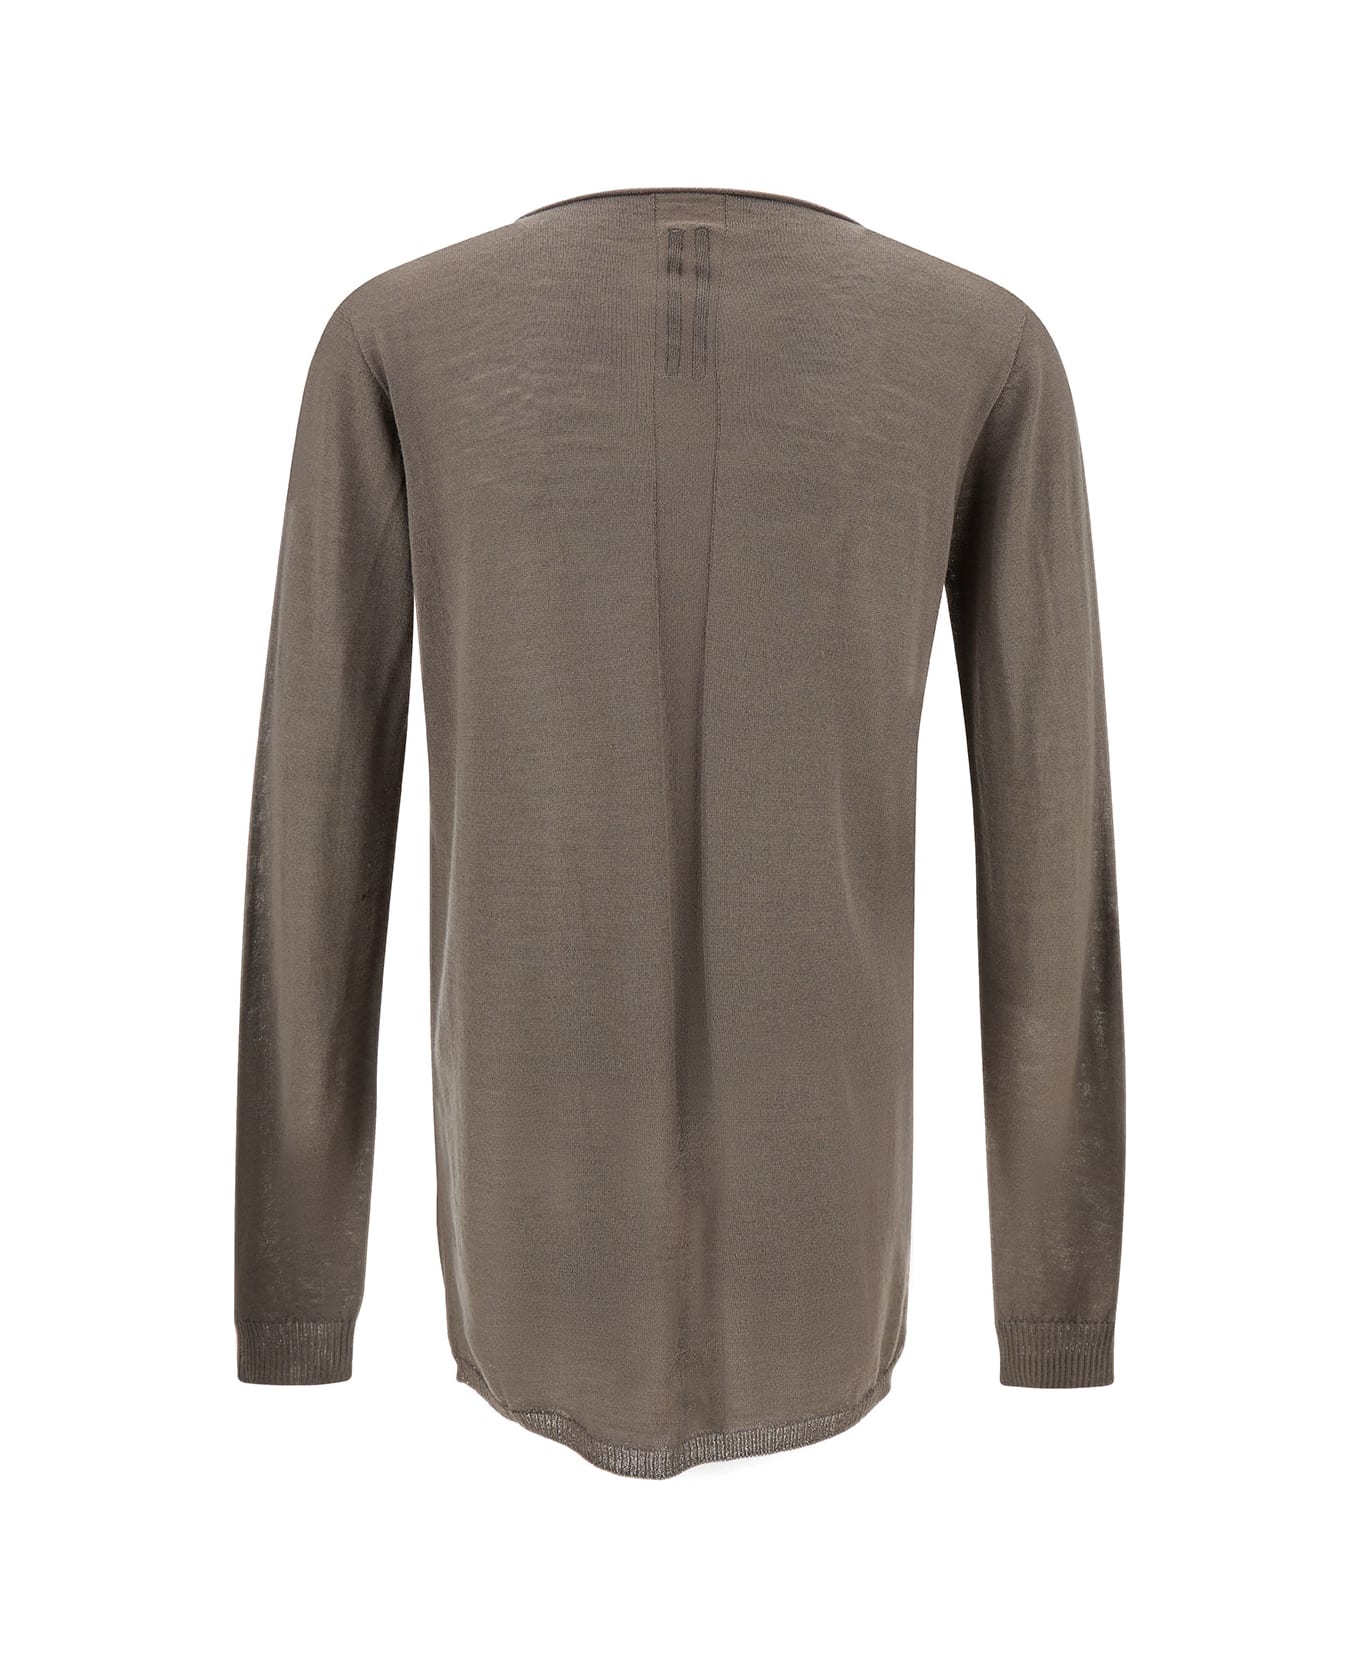 Rick Owens Beige Long-sleeve Top With Boat Neckline In Wool Man - Pink ニットウェア